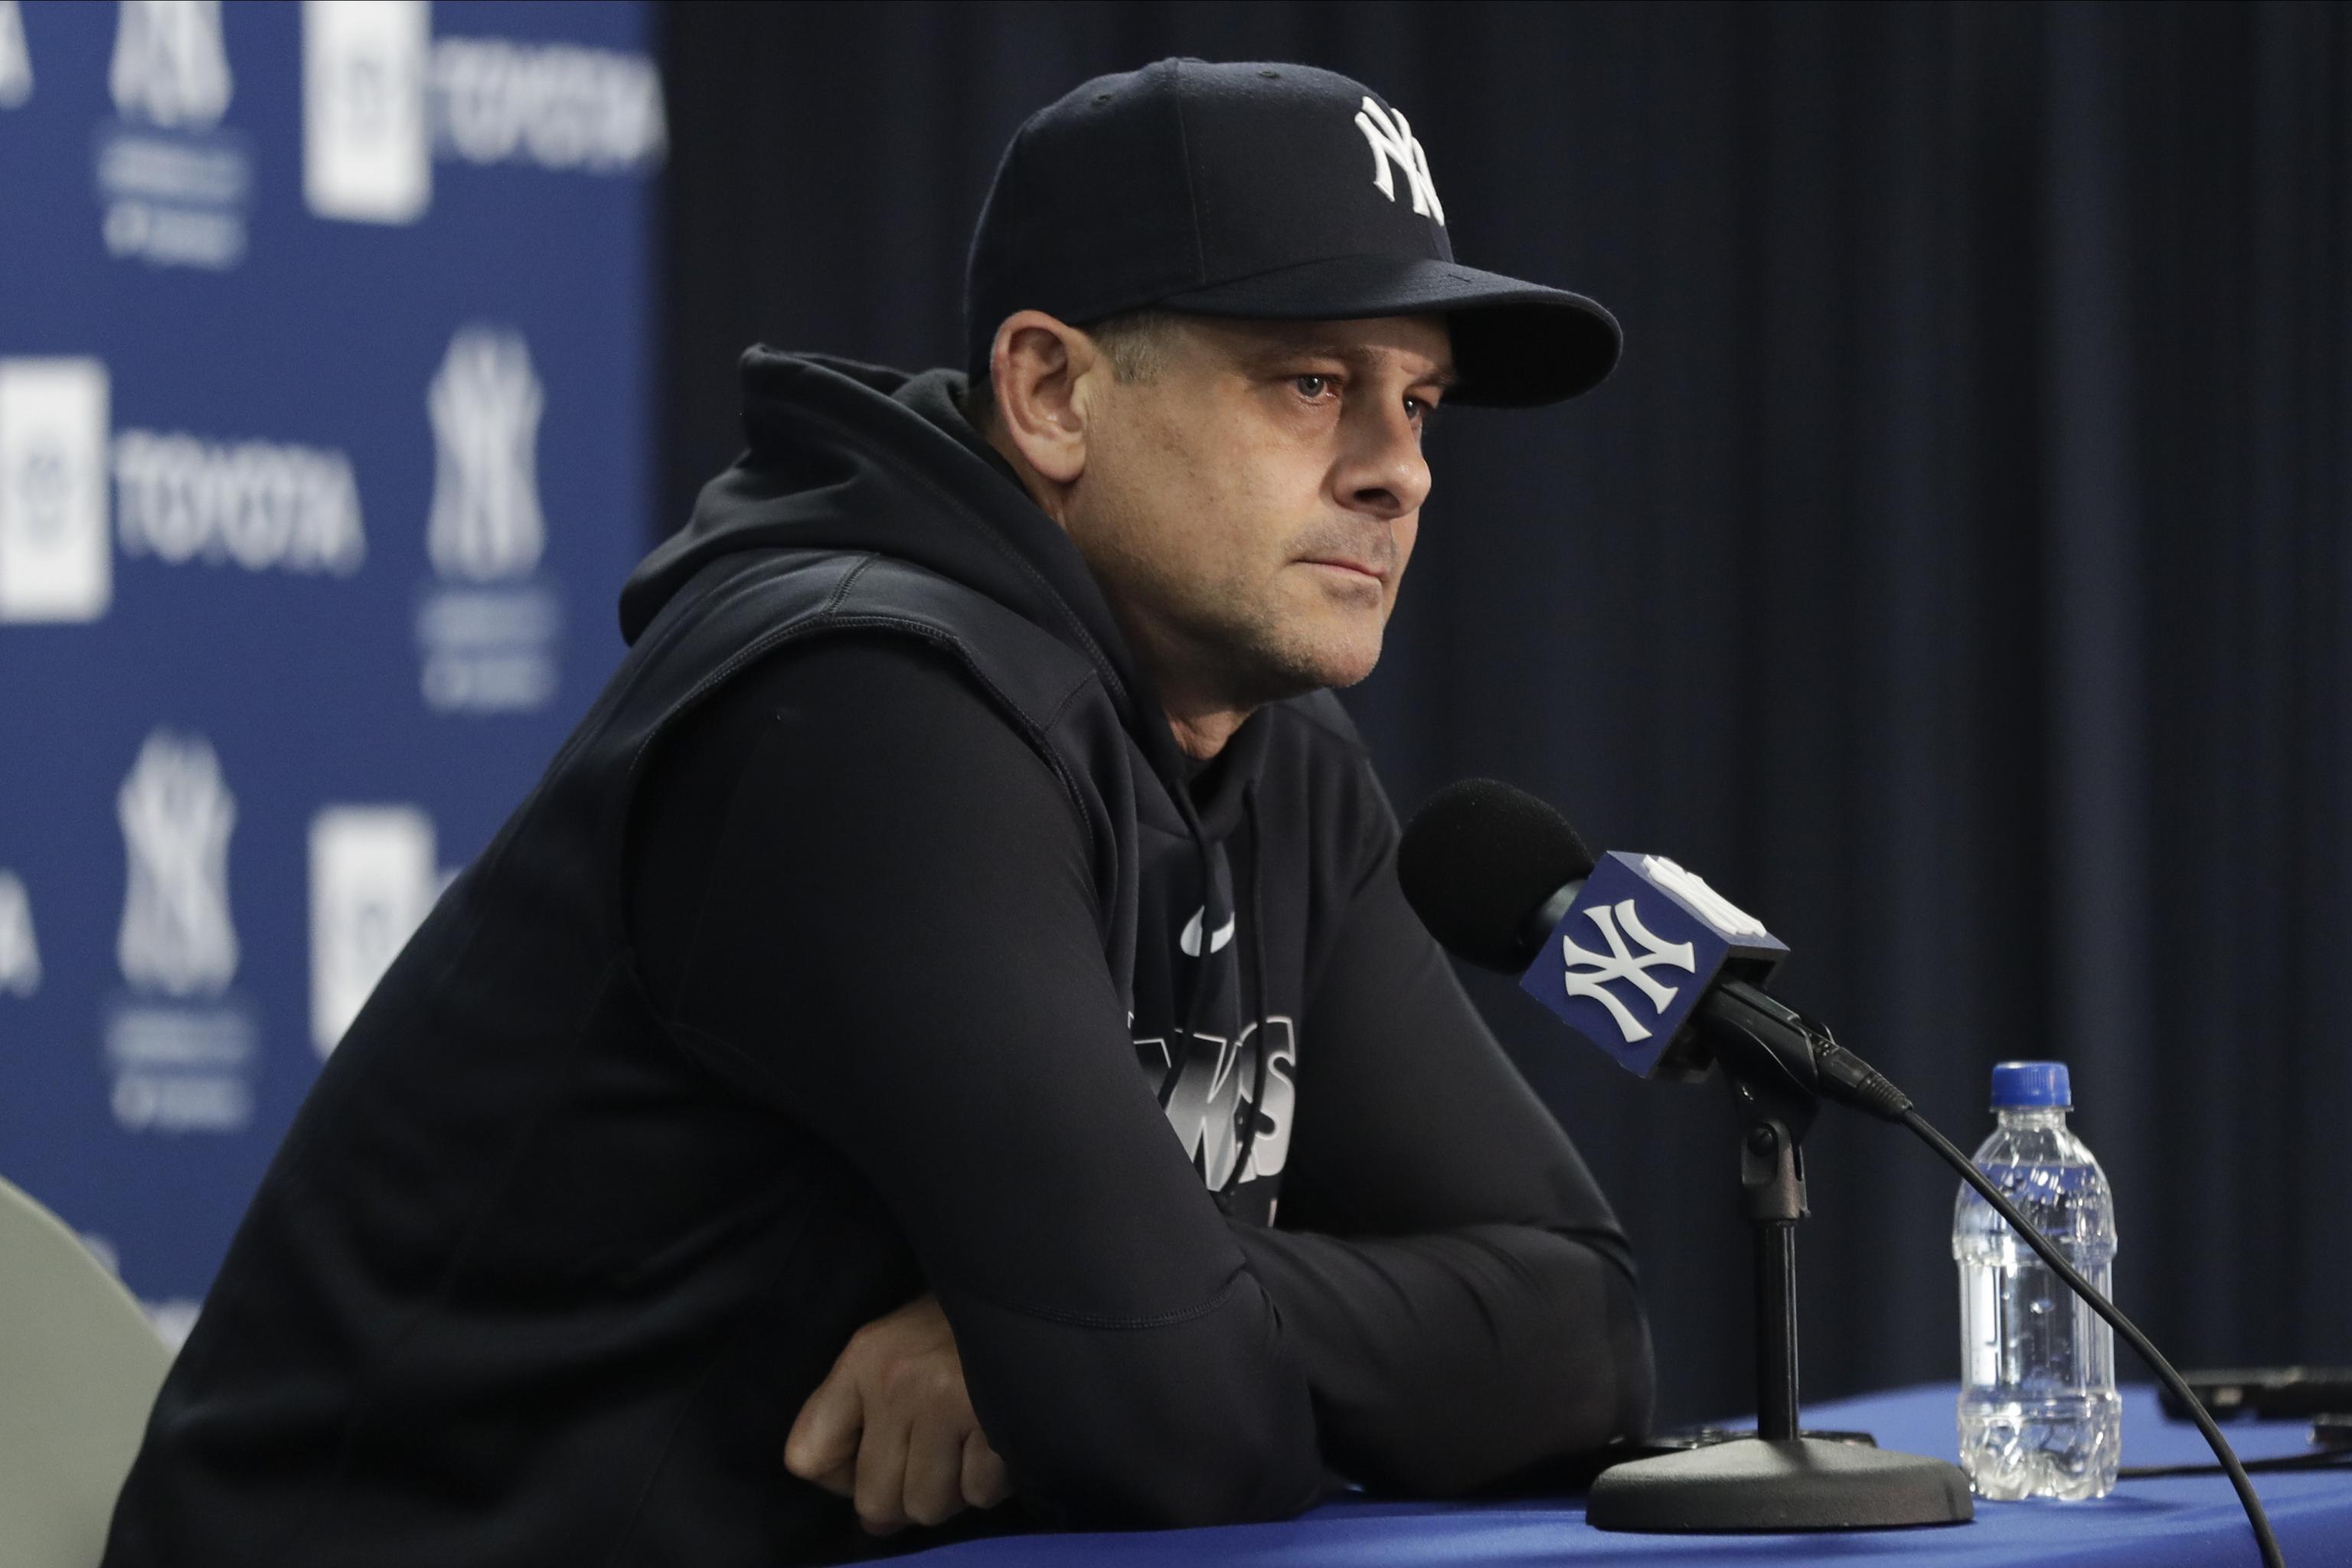 Yankees manager Aaron Boone taking leave of absence to receive pacemaker -  MLB Daily Dish